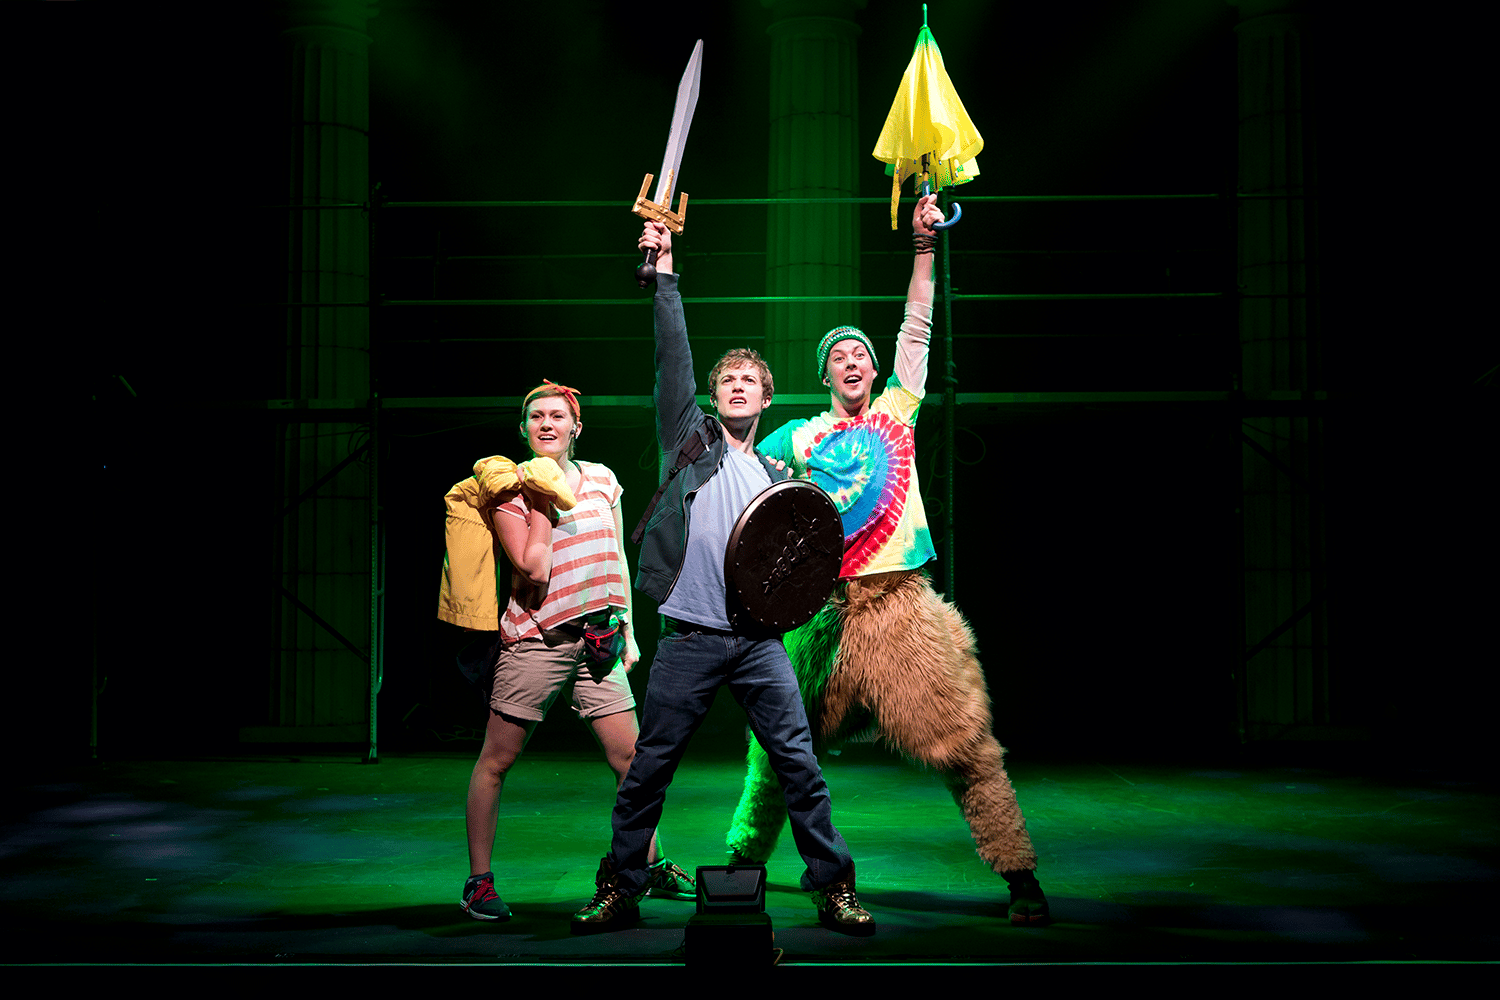 Three performers standing at the front of a stage holding a sword, shield, and umbrella.